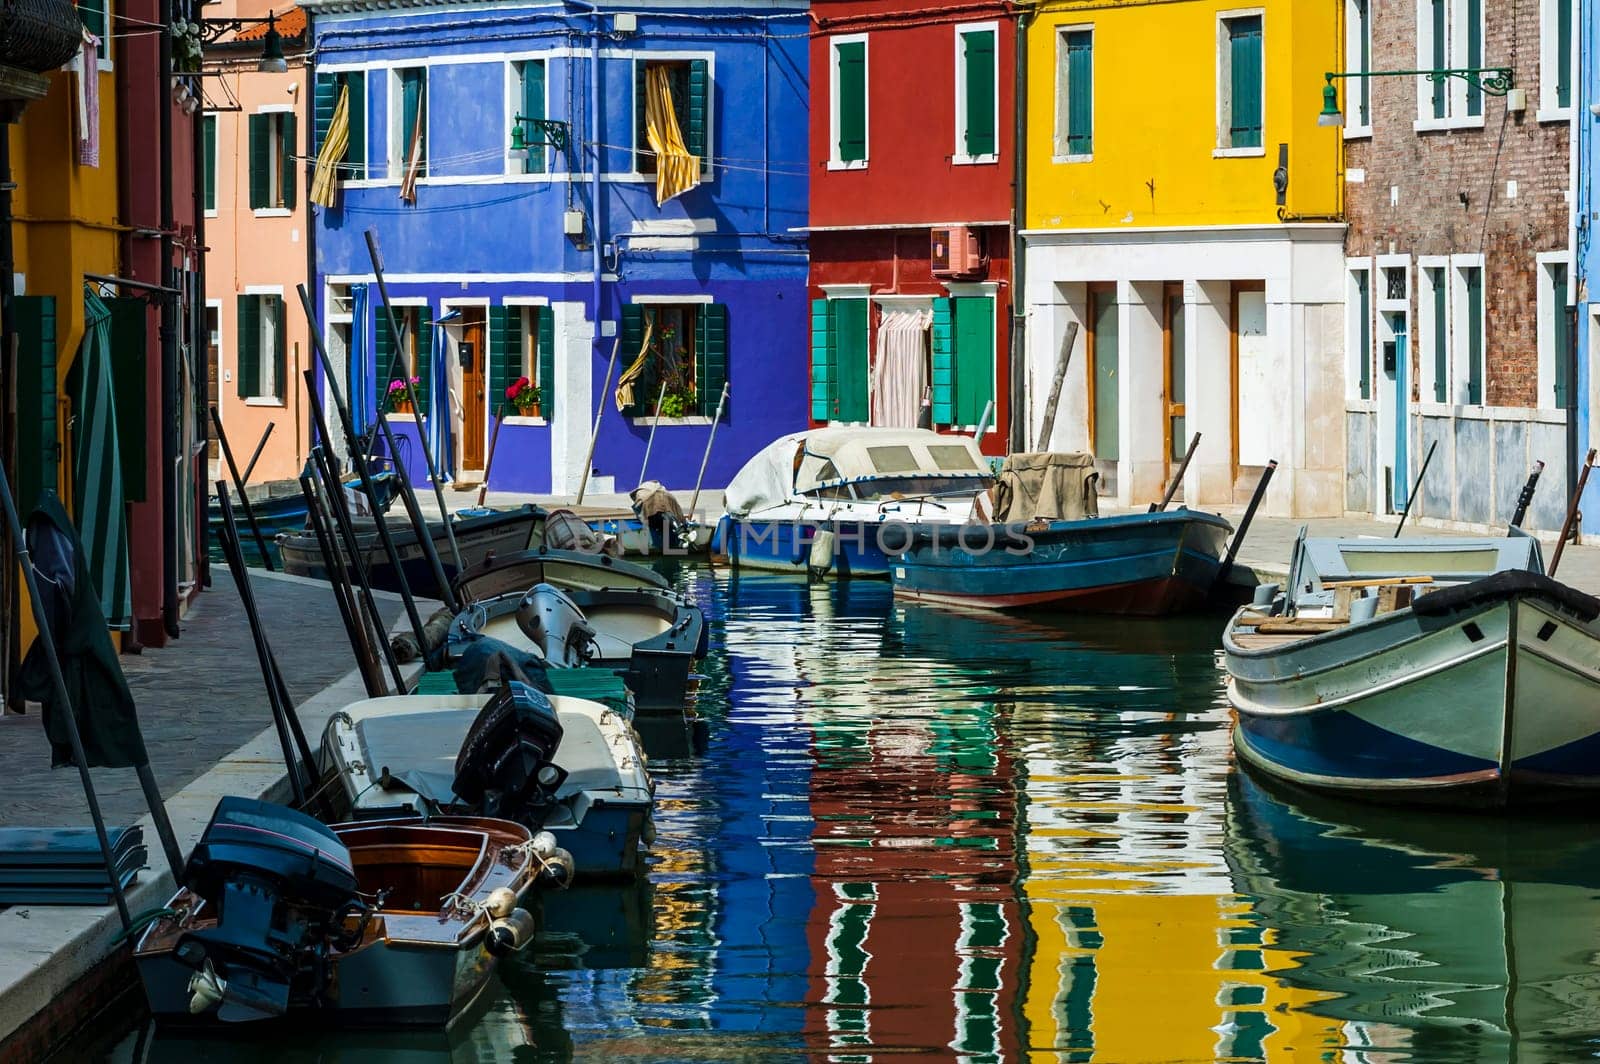 The island of Burano in the Venetian lagoon famous for its brightly colored houses